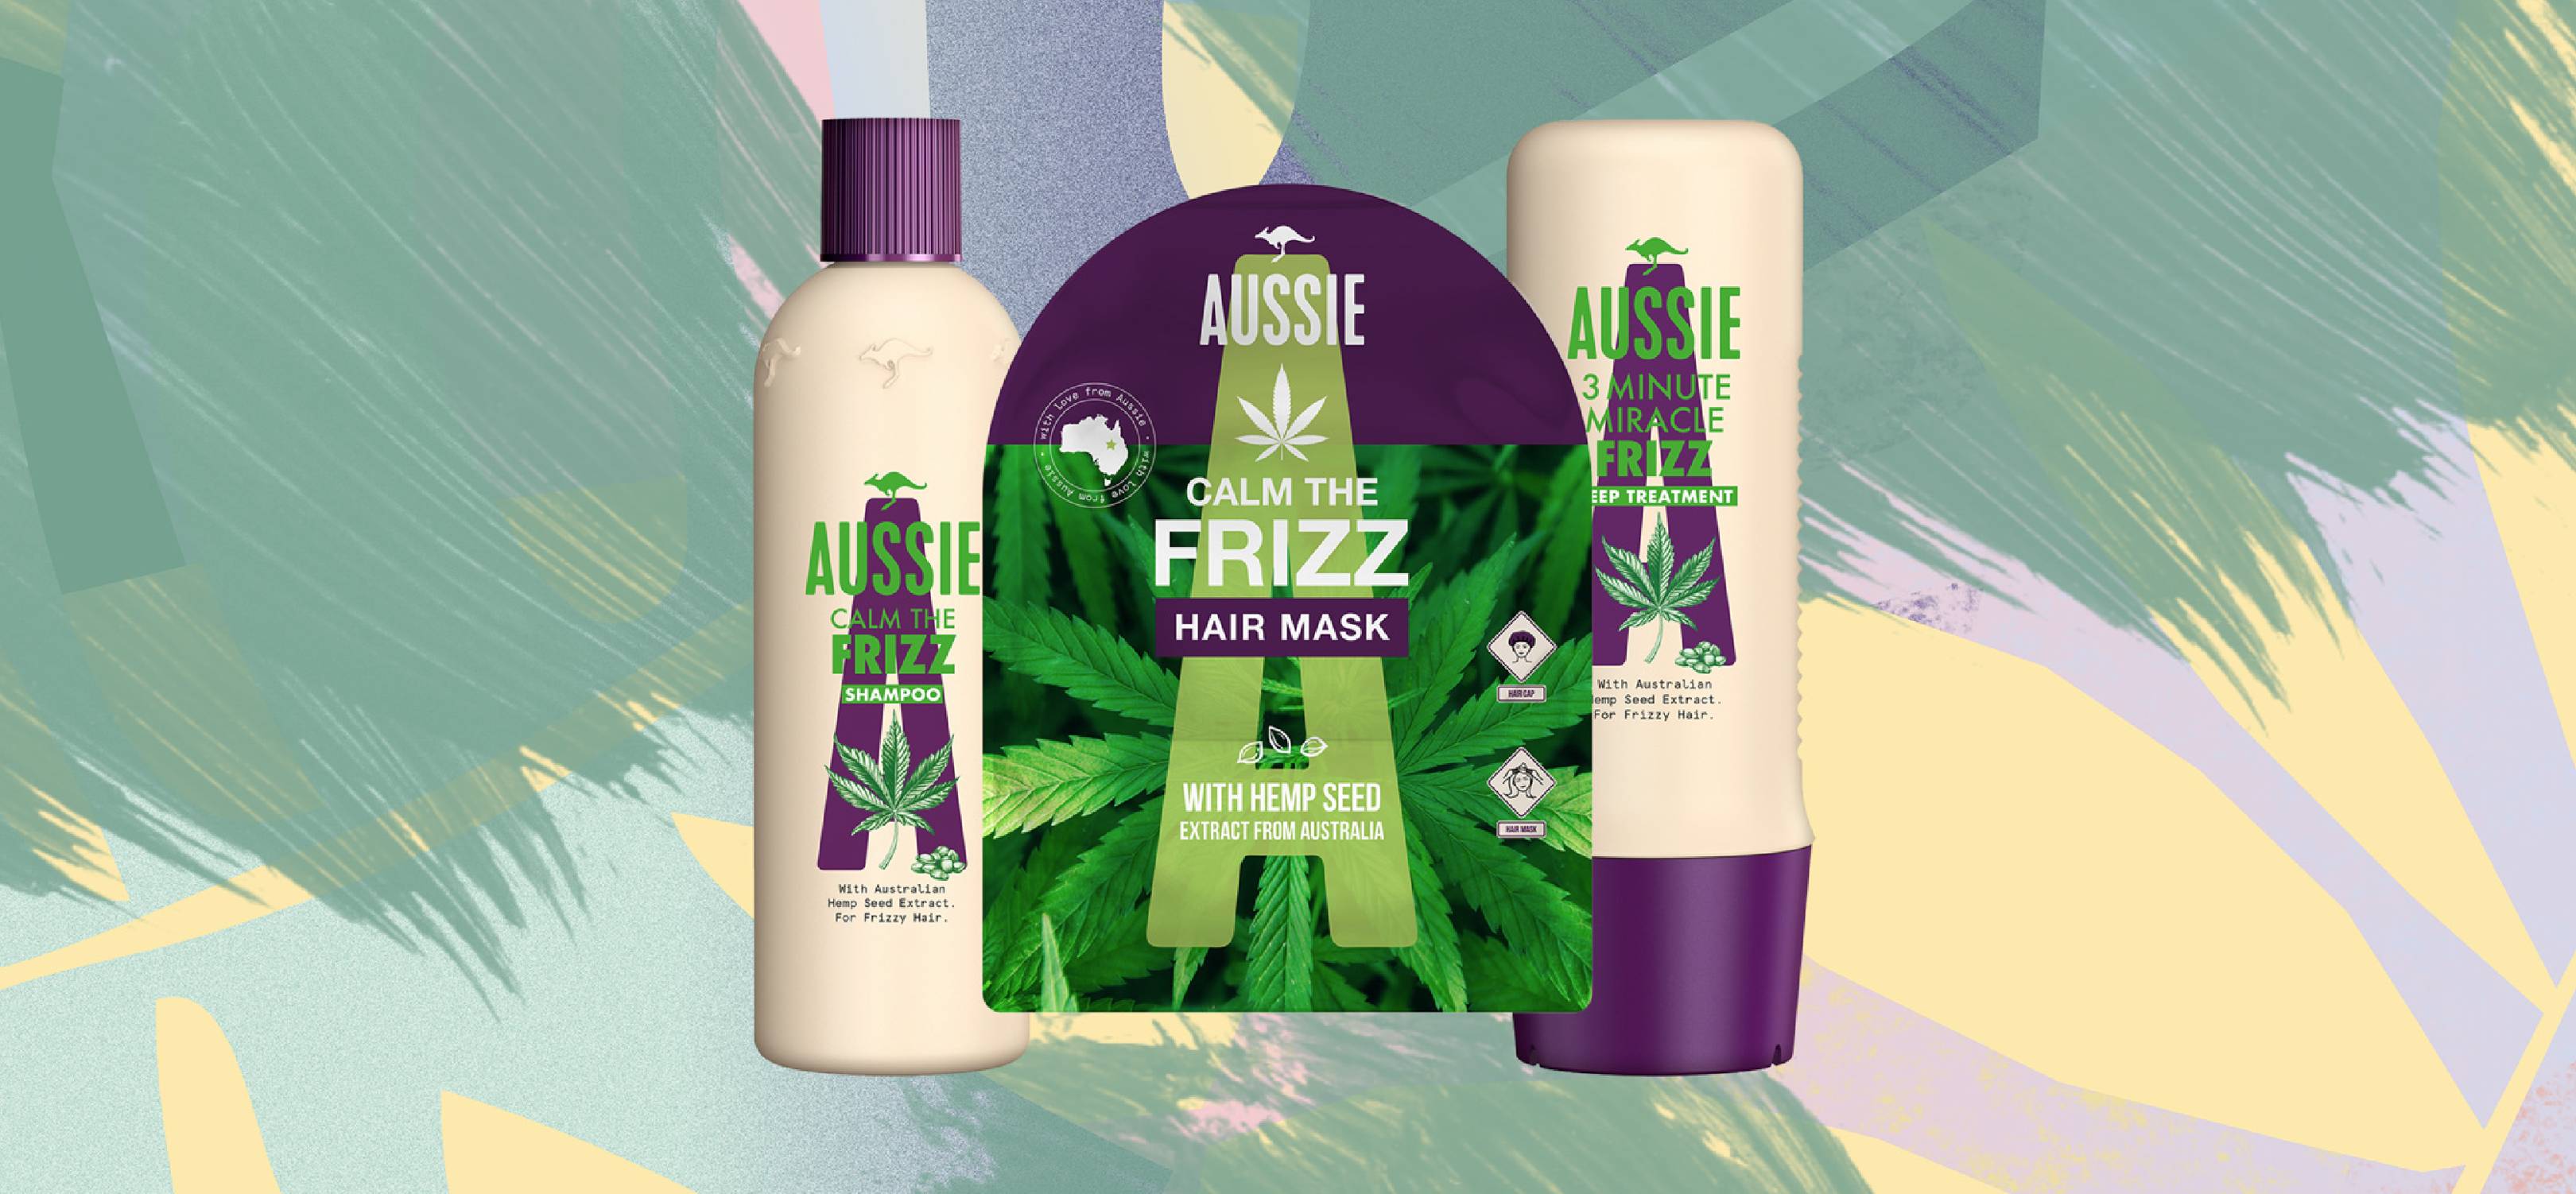 We Tried Aussie Hemp Infused Hair Care Range & Here's Our Review ...